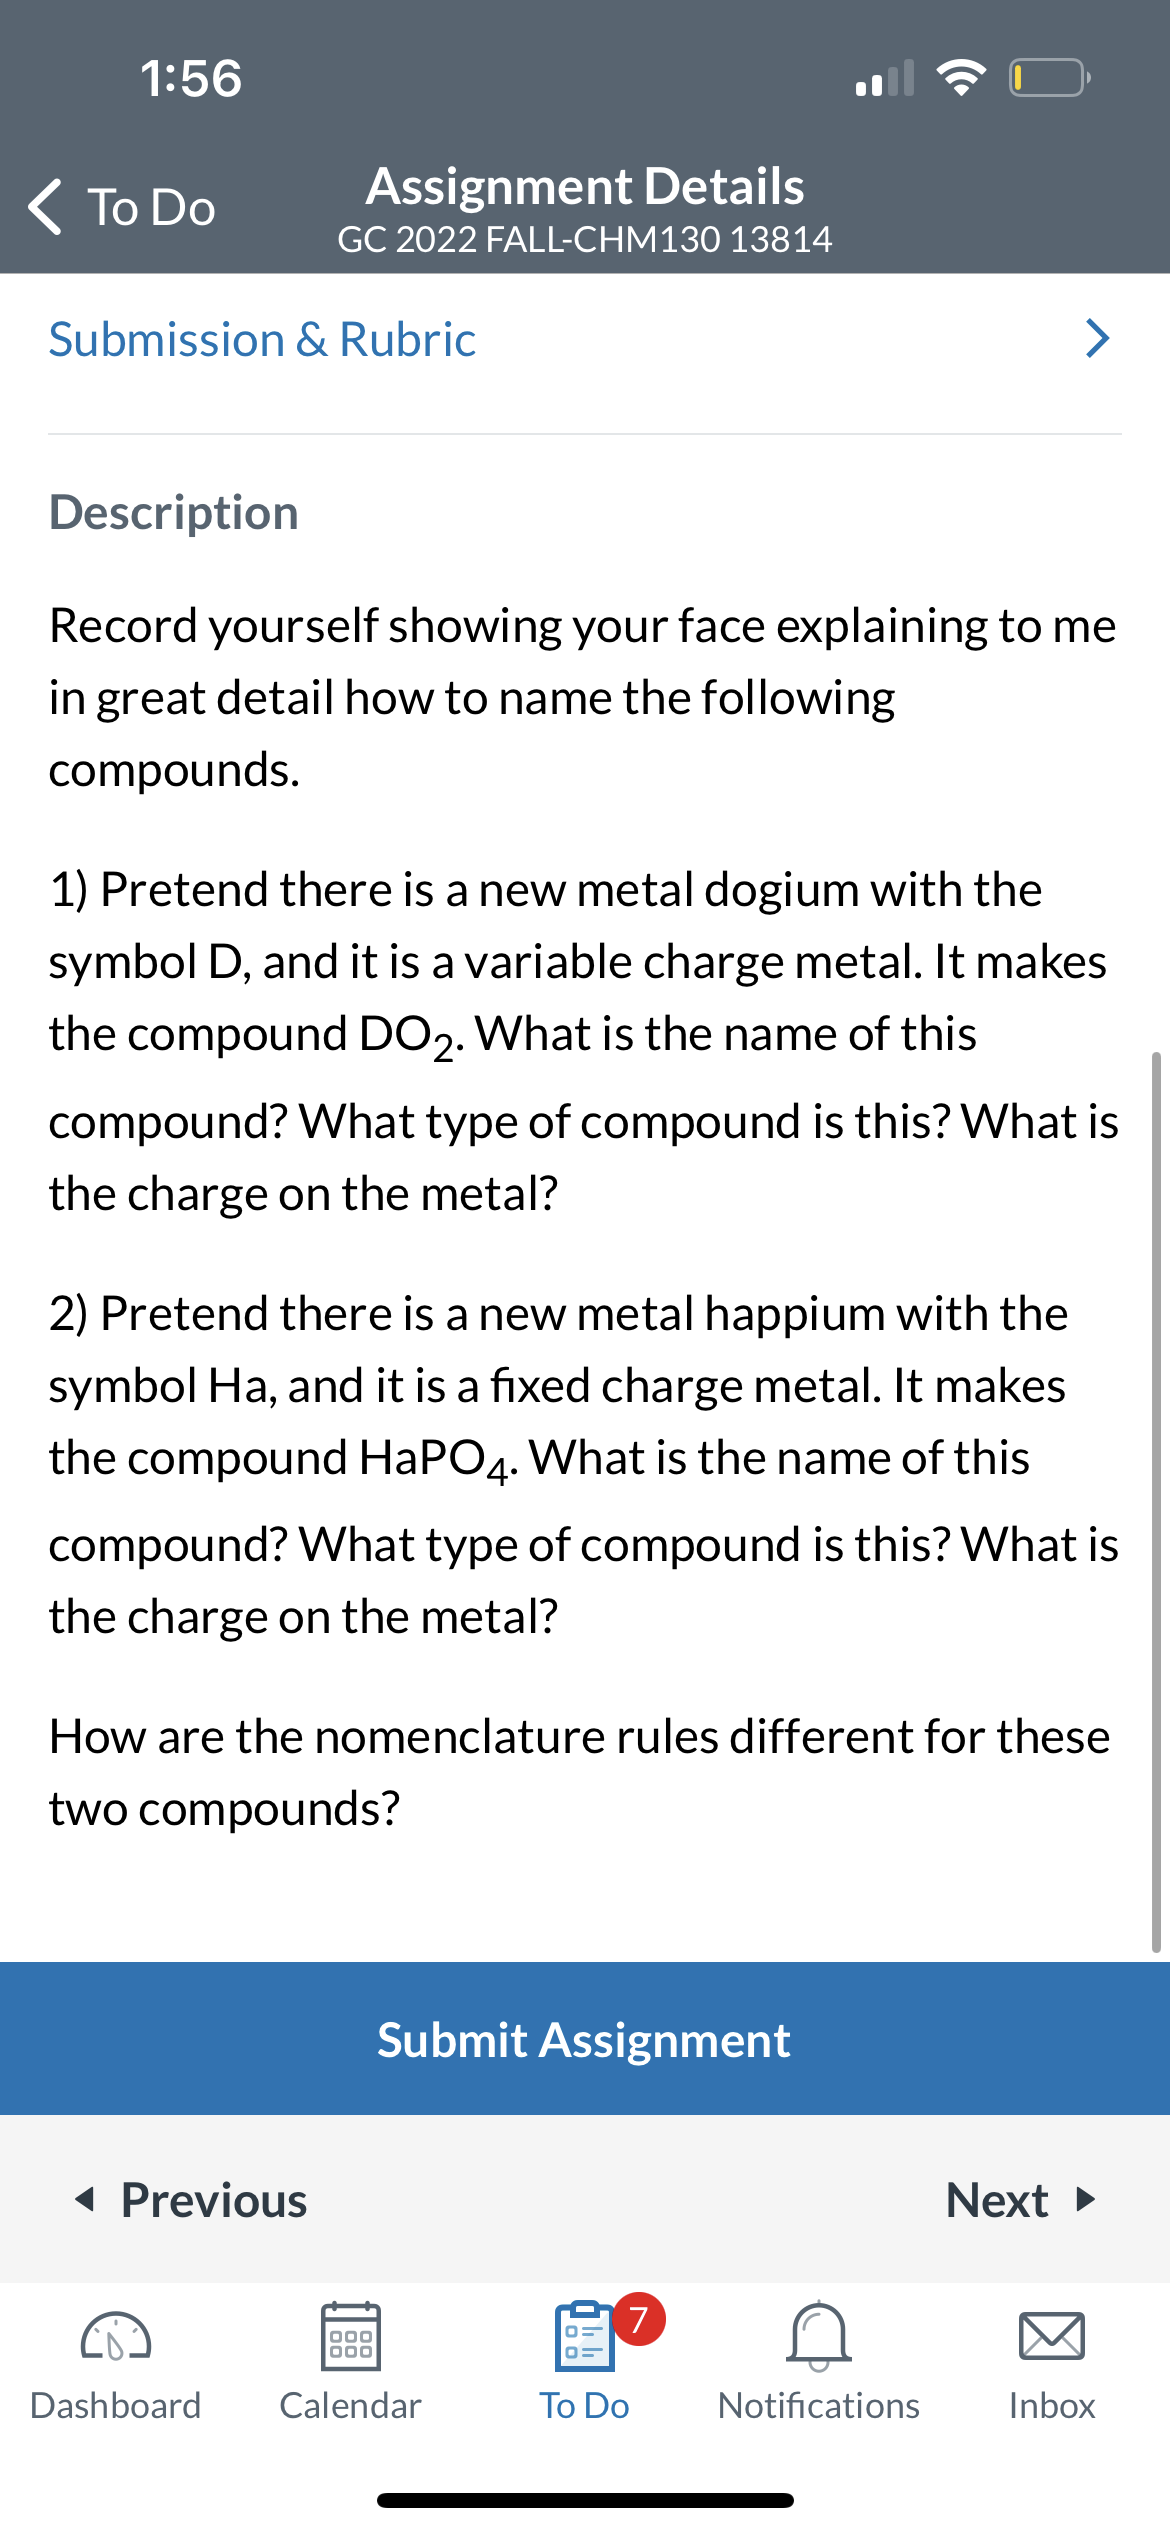 1:56
< To Do
Assignment Details
GC 2022 FALL-CHM130 13814
Submission & Rubric
Description
Record yourself showing your face explaining to me
in great detail how to name the following
compounds.
1) Pretend there is a new metal dogium with the
symbol D, and it is a variable charge metal. It makes
the compound DO₂. What is the name of this
compound? What type of compound is this? What is
the charge on the metal?
2) Pretend there is a new metal happium with the
symbol Ha, and it is a fixed charge metal. It makes
the compound HaPO4. What is the name of this
compound? What type of compound is this? What is
the charge on the metal?
How are the nomenclature rules different for these
two compounds?
◄ Previous
Submit Assignment
000
000
Dashboard Calendar
7
To Do
Notifications
Next ►
Inbox